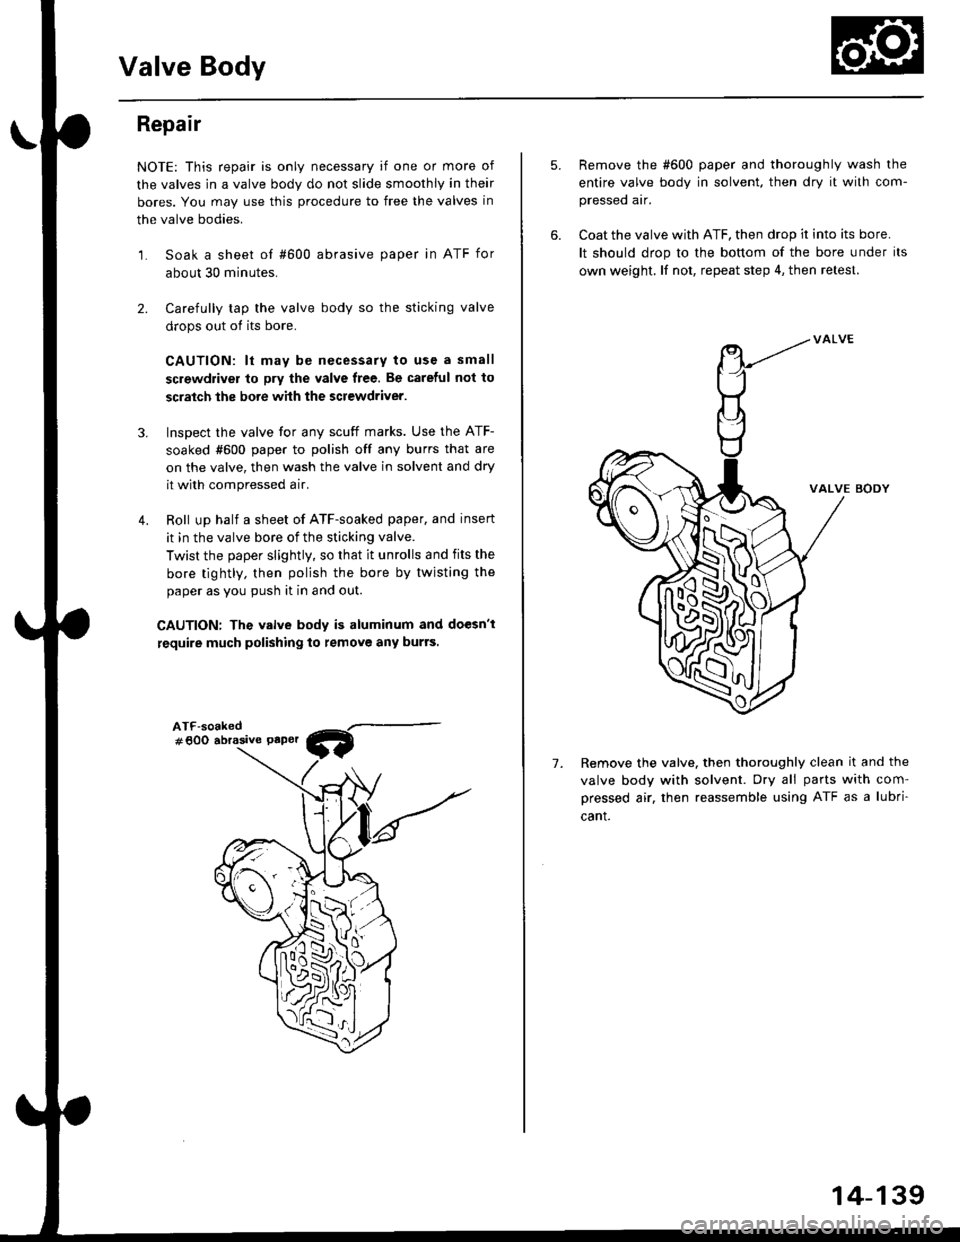 HONDA CIVIC 2000 6.G Workshop Manual Valve Body
2.
Repair
NOTE: This repair is only necessary if one or more of
the valves in a valve body do not slide smoothly in their
bores. You may use this procedure to free the valves in
the valve b